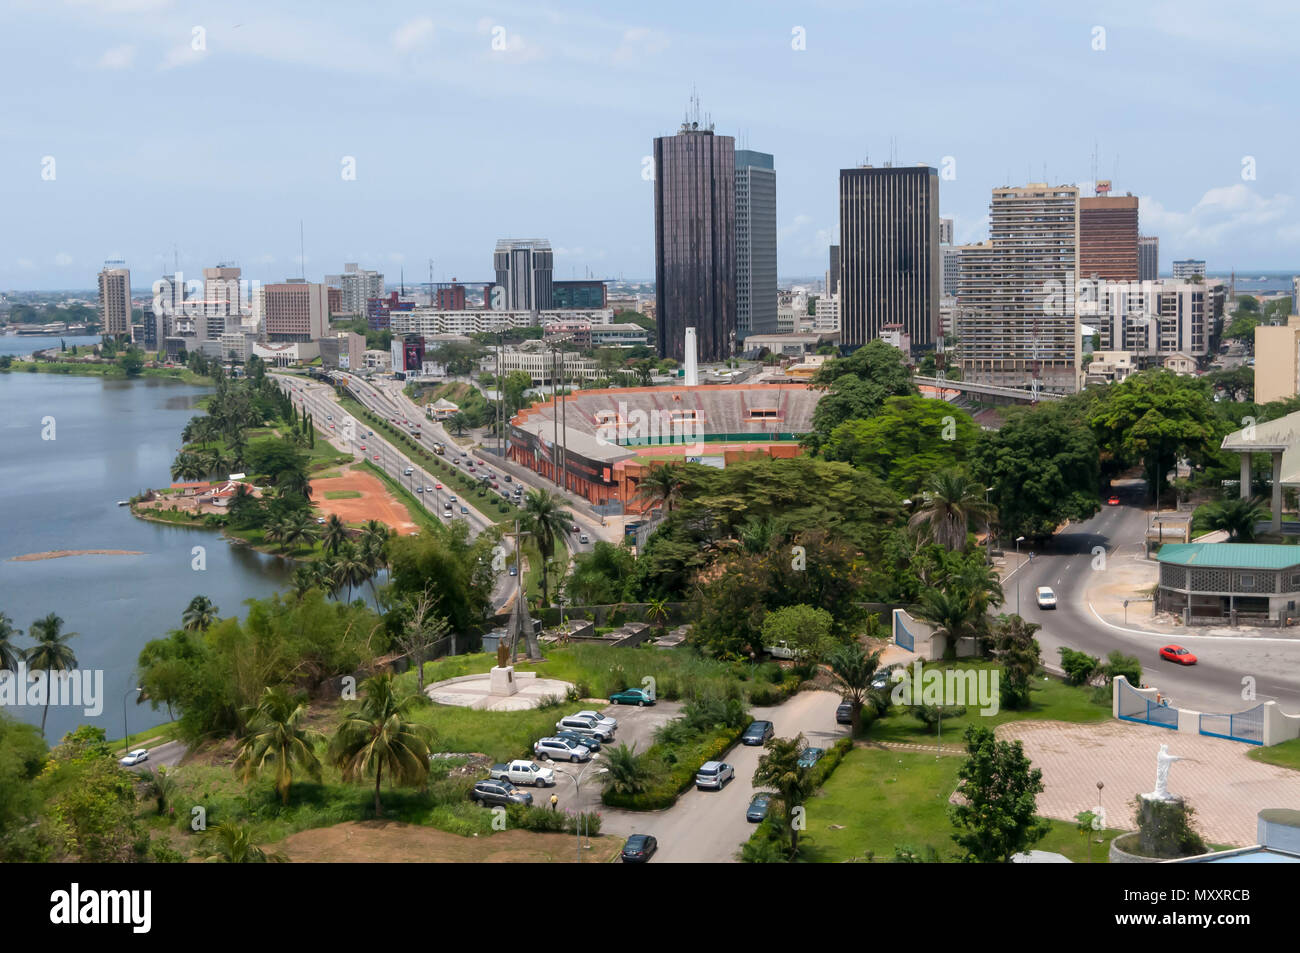 ABIDJAN, IVORY COAST, AFRICA. April 2013. The view of Plateau district in Abidjan, with the 'le Felicia' stadium. Stock Photo